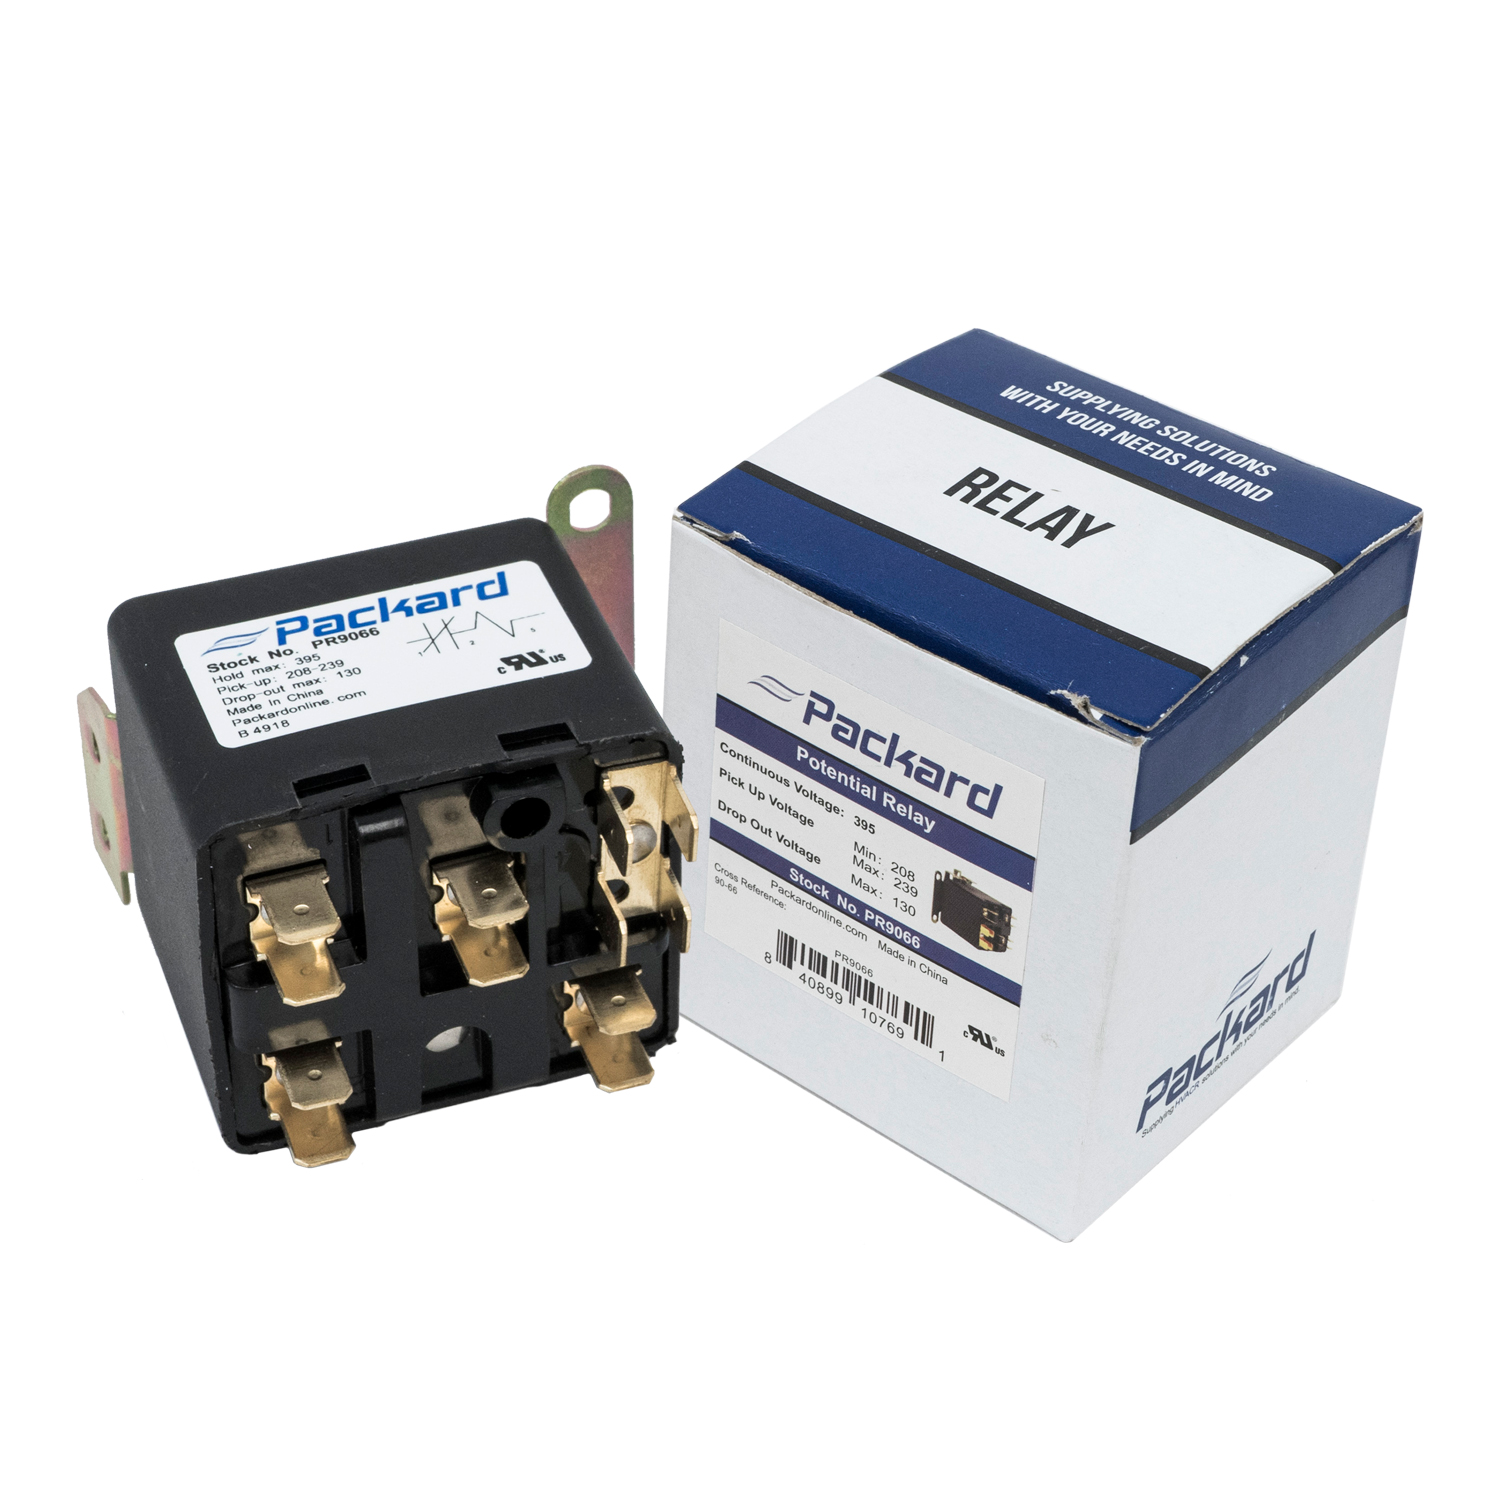 White-Rodgers Replacement Potential Relay 395 ContinuousV age 90-66 By Packard 